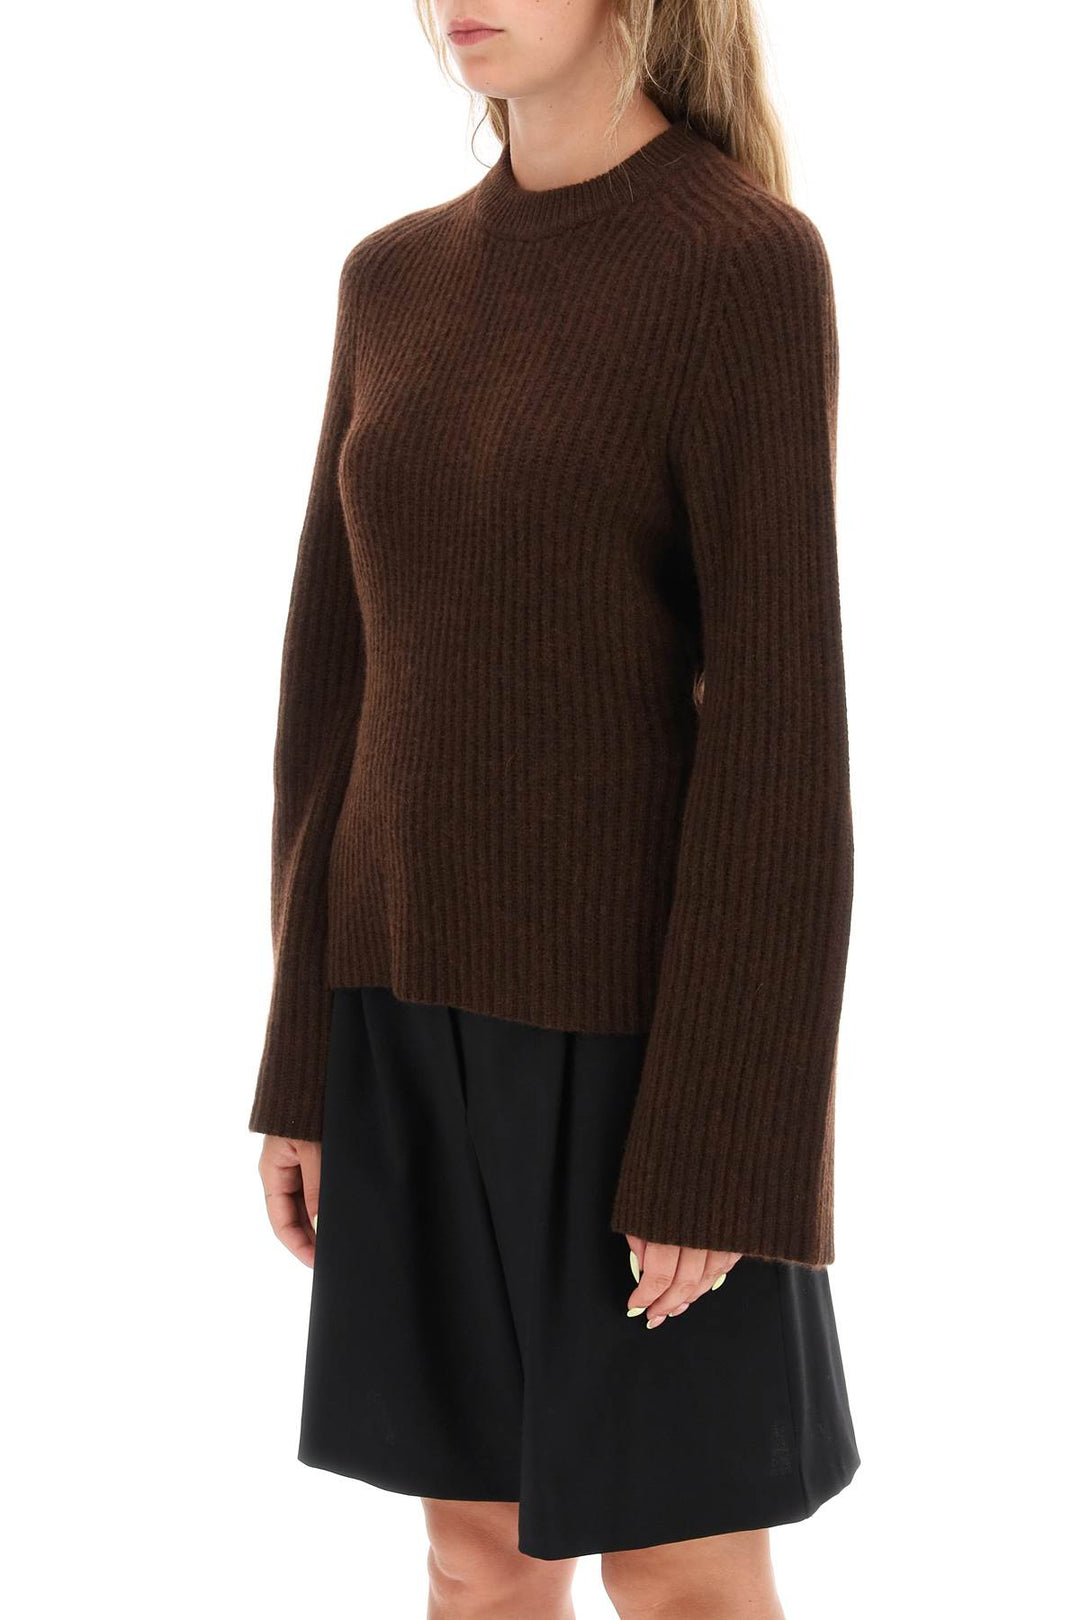 Loulou Studio 'Kota' Cashmere Sweater With Bell Sleeves   Marrone